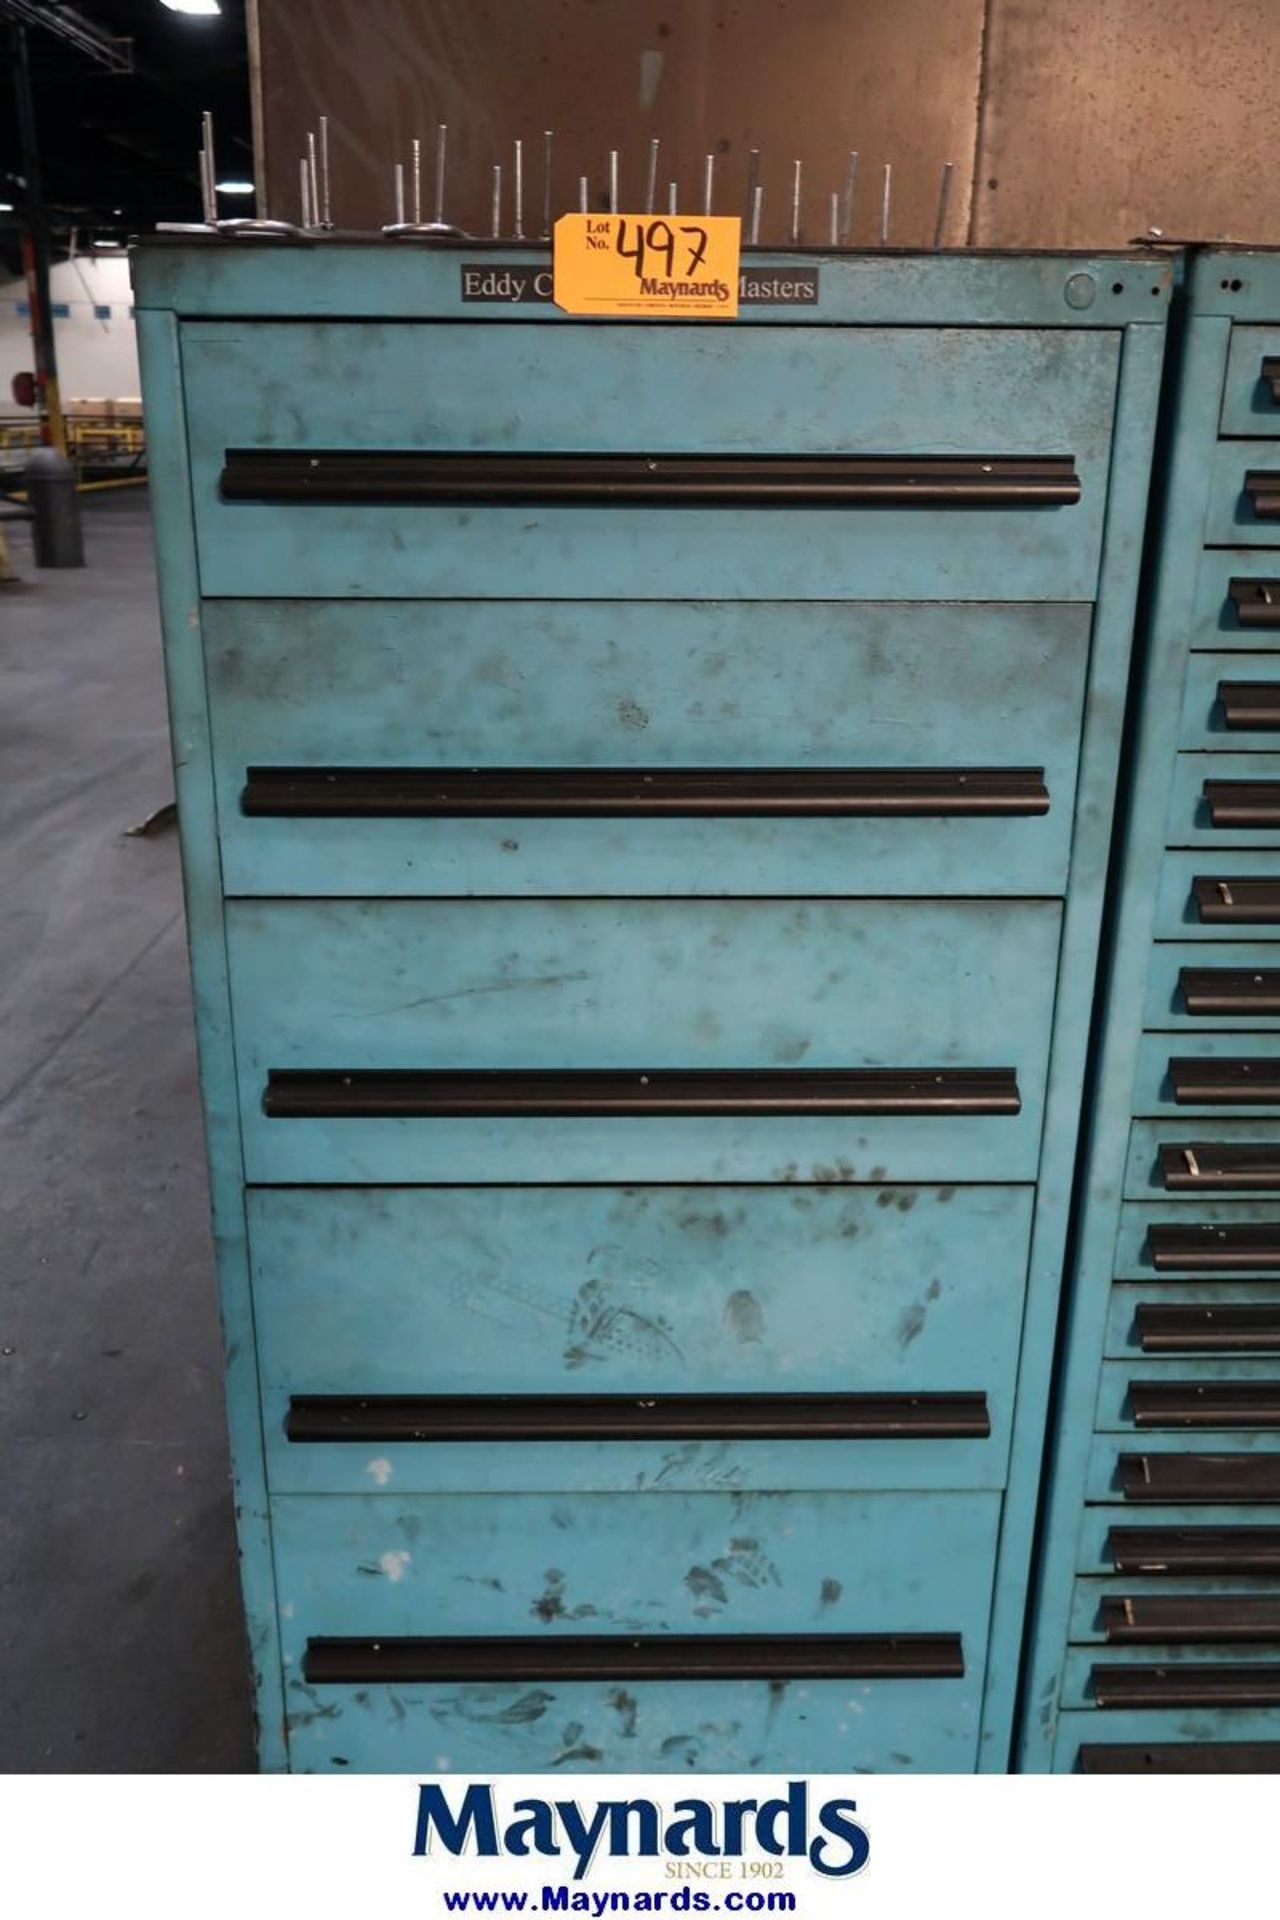 5-Drawer Heavy Duty Parts Cabinet